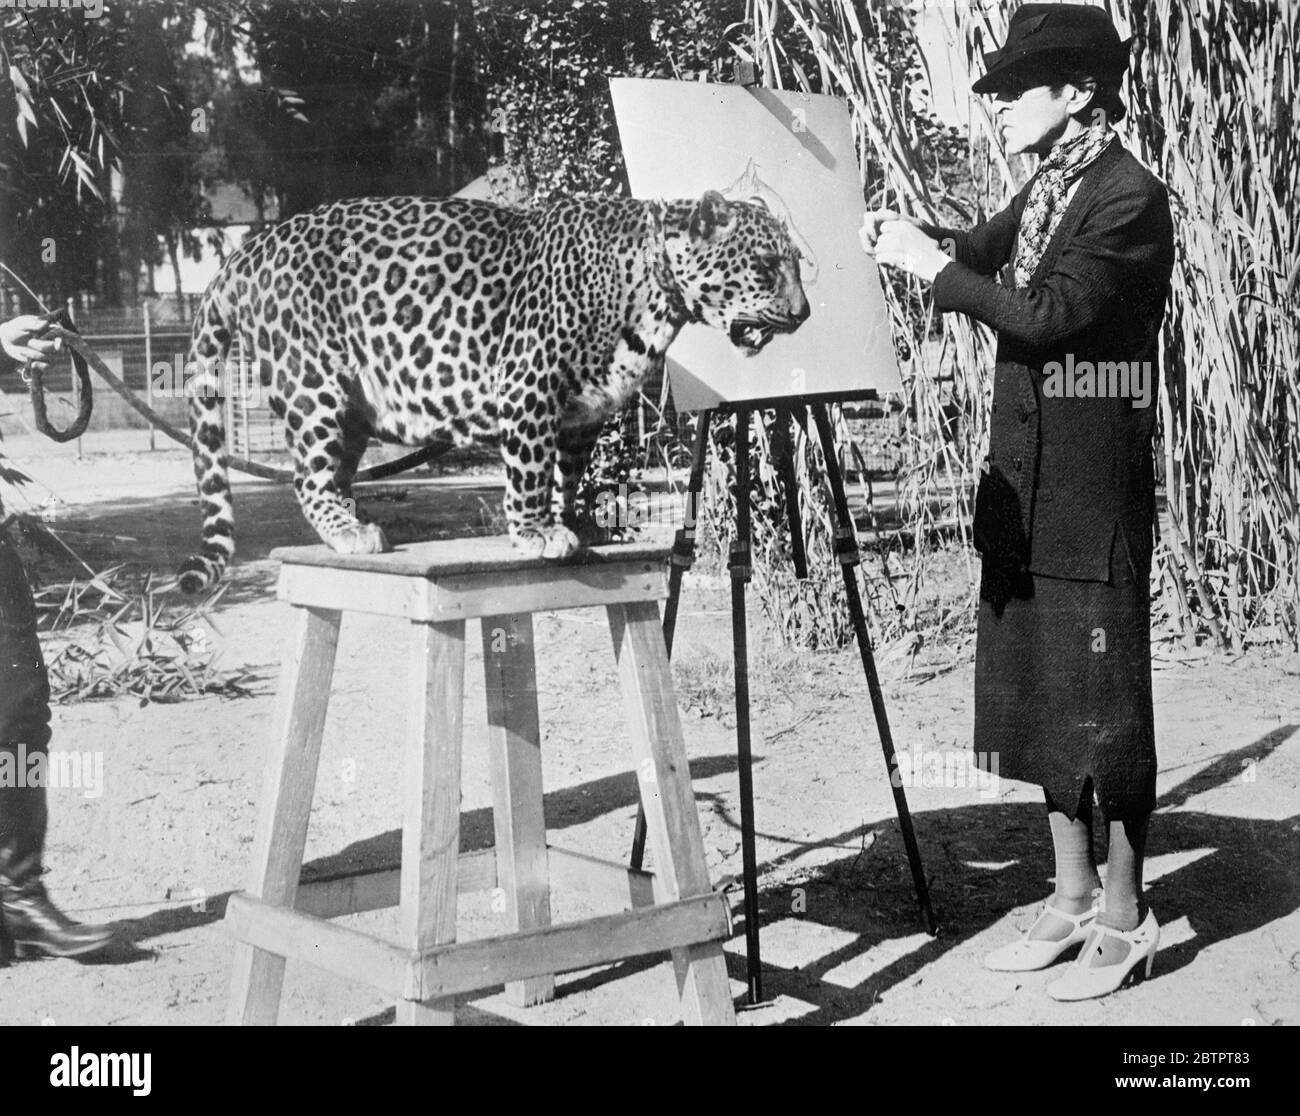 Dangerous close-up!. London artist sketches in California Zoo. Miss Maud Earl of London famous animal painter, gets close to her subject and painting a close-up of Nissa, Hollywood Leopard that has taken part in several films, in the California Zoological Park, Los Angeles, USA. Stock Photo